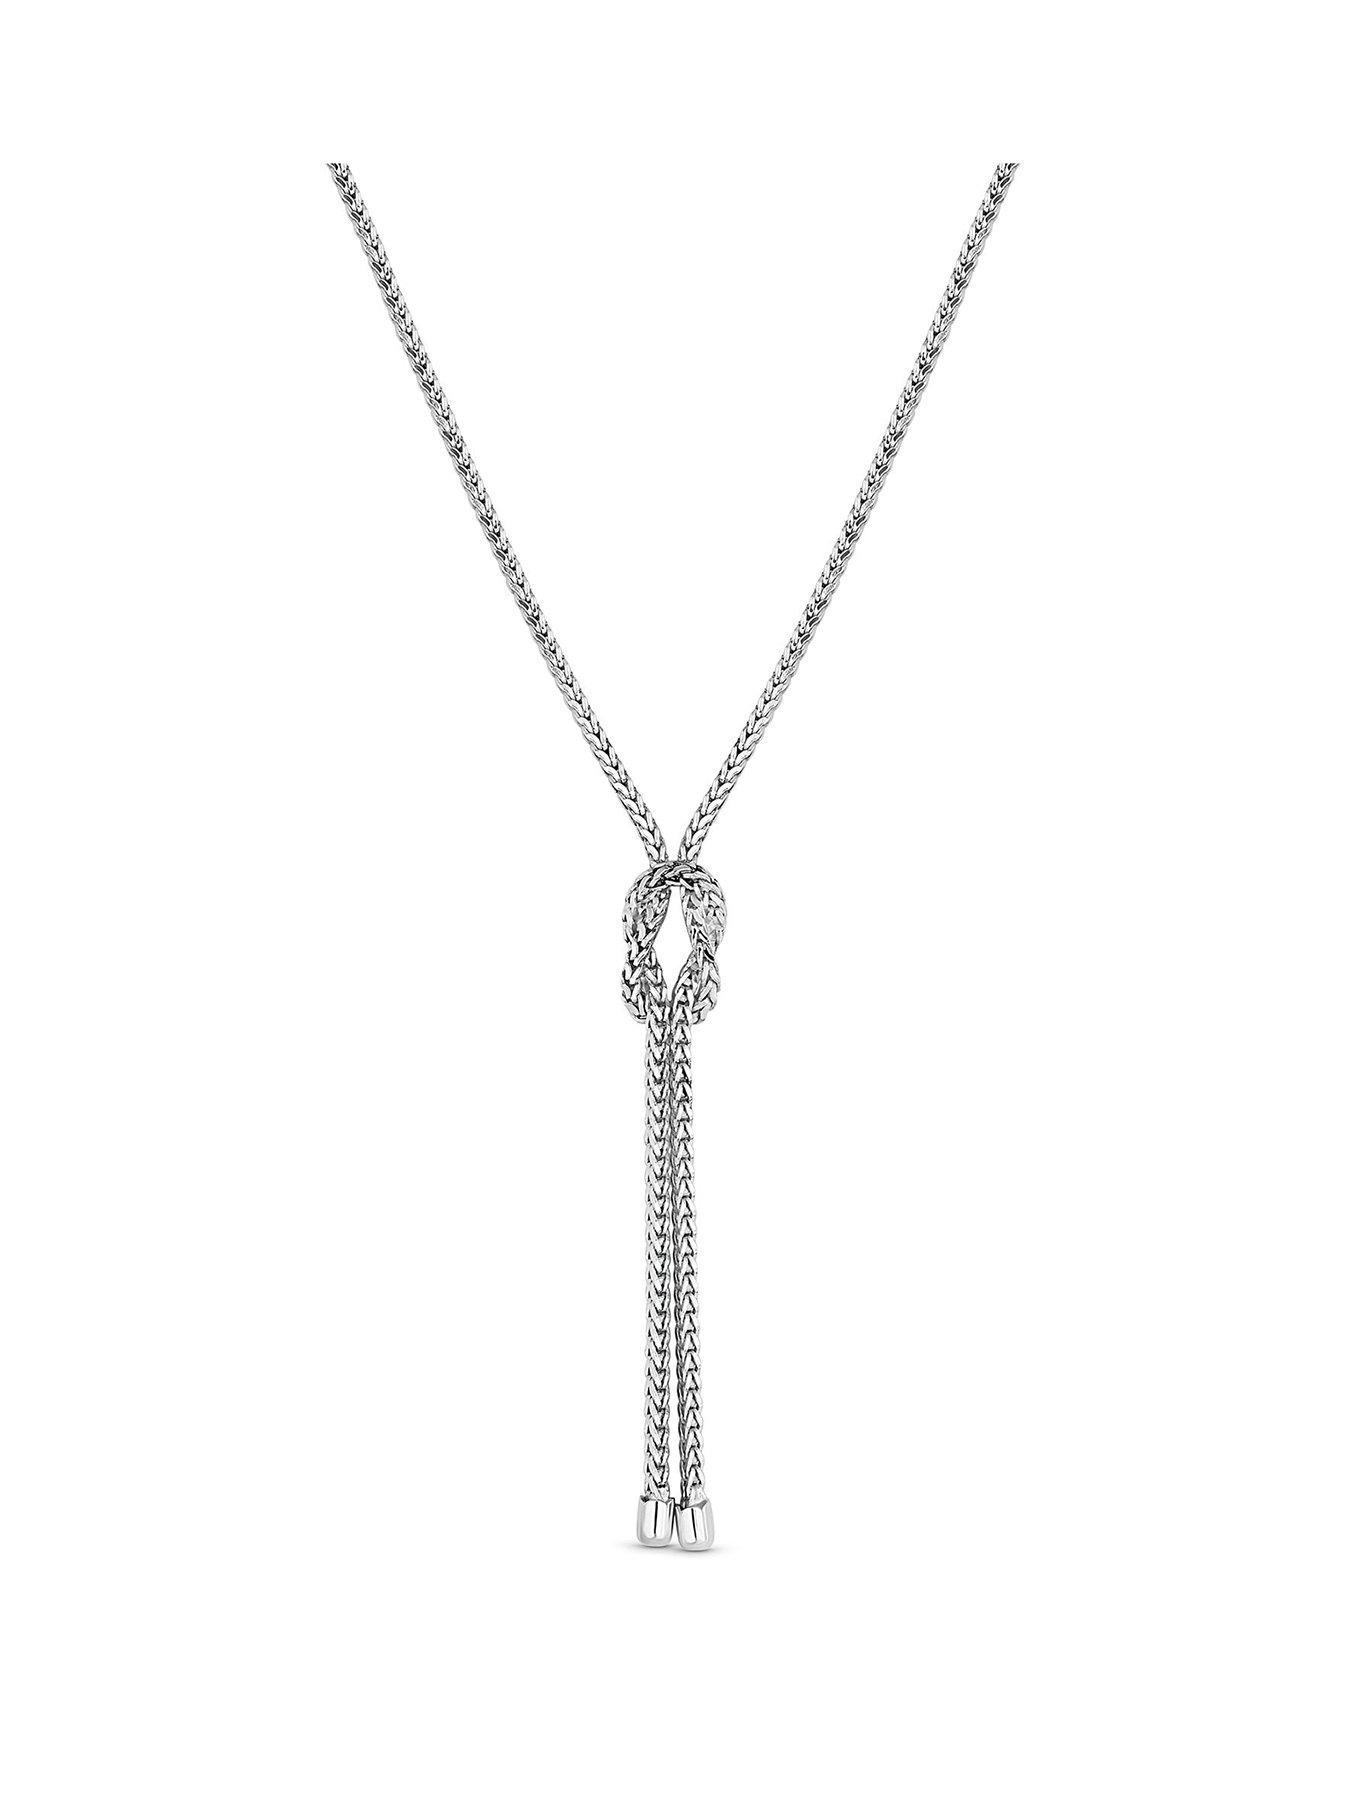  Sterling Silver 925 Polished Fox Tail Knot Lariat Necklace